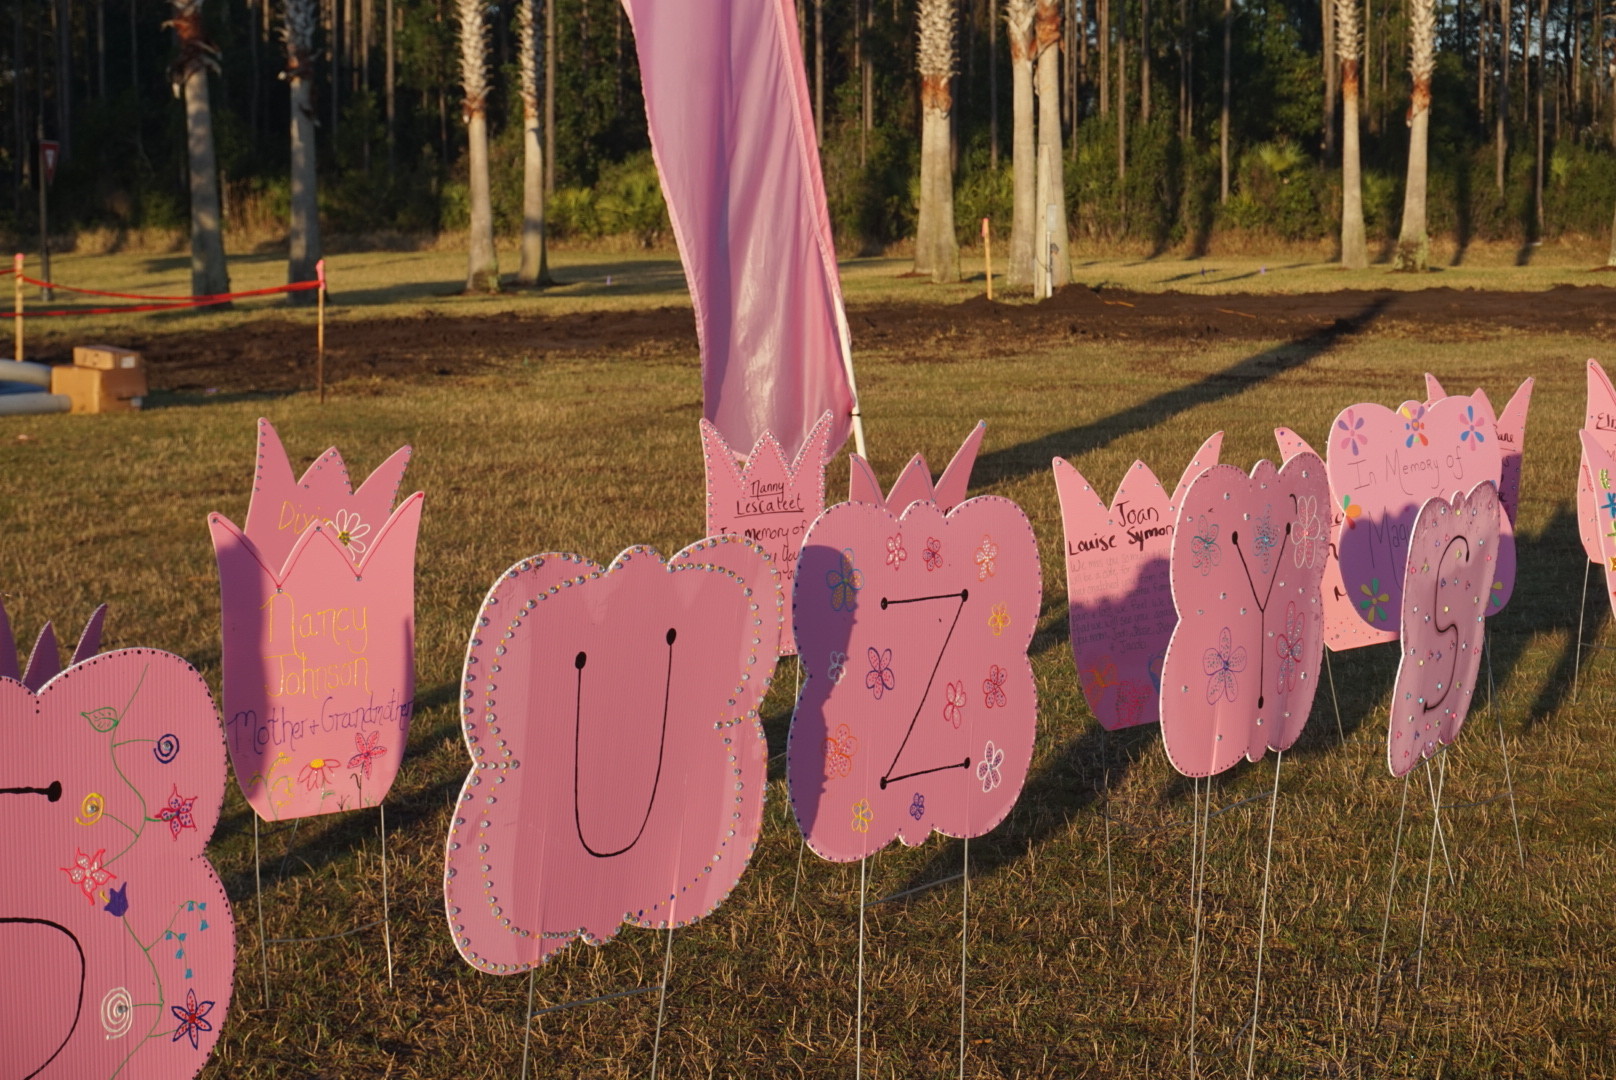 Sweet, handwritten messages dot “Suzy’s Garden,” a tribute to breast cancer patients who fought and are still fighting the disease.